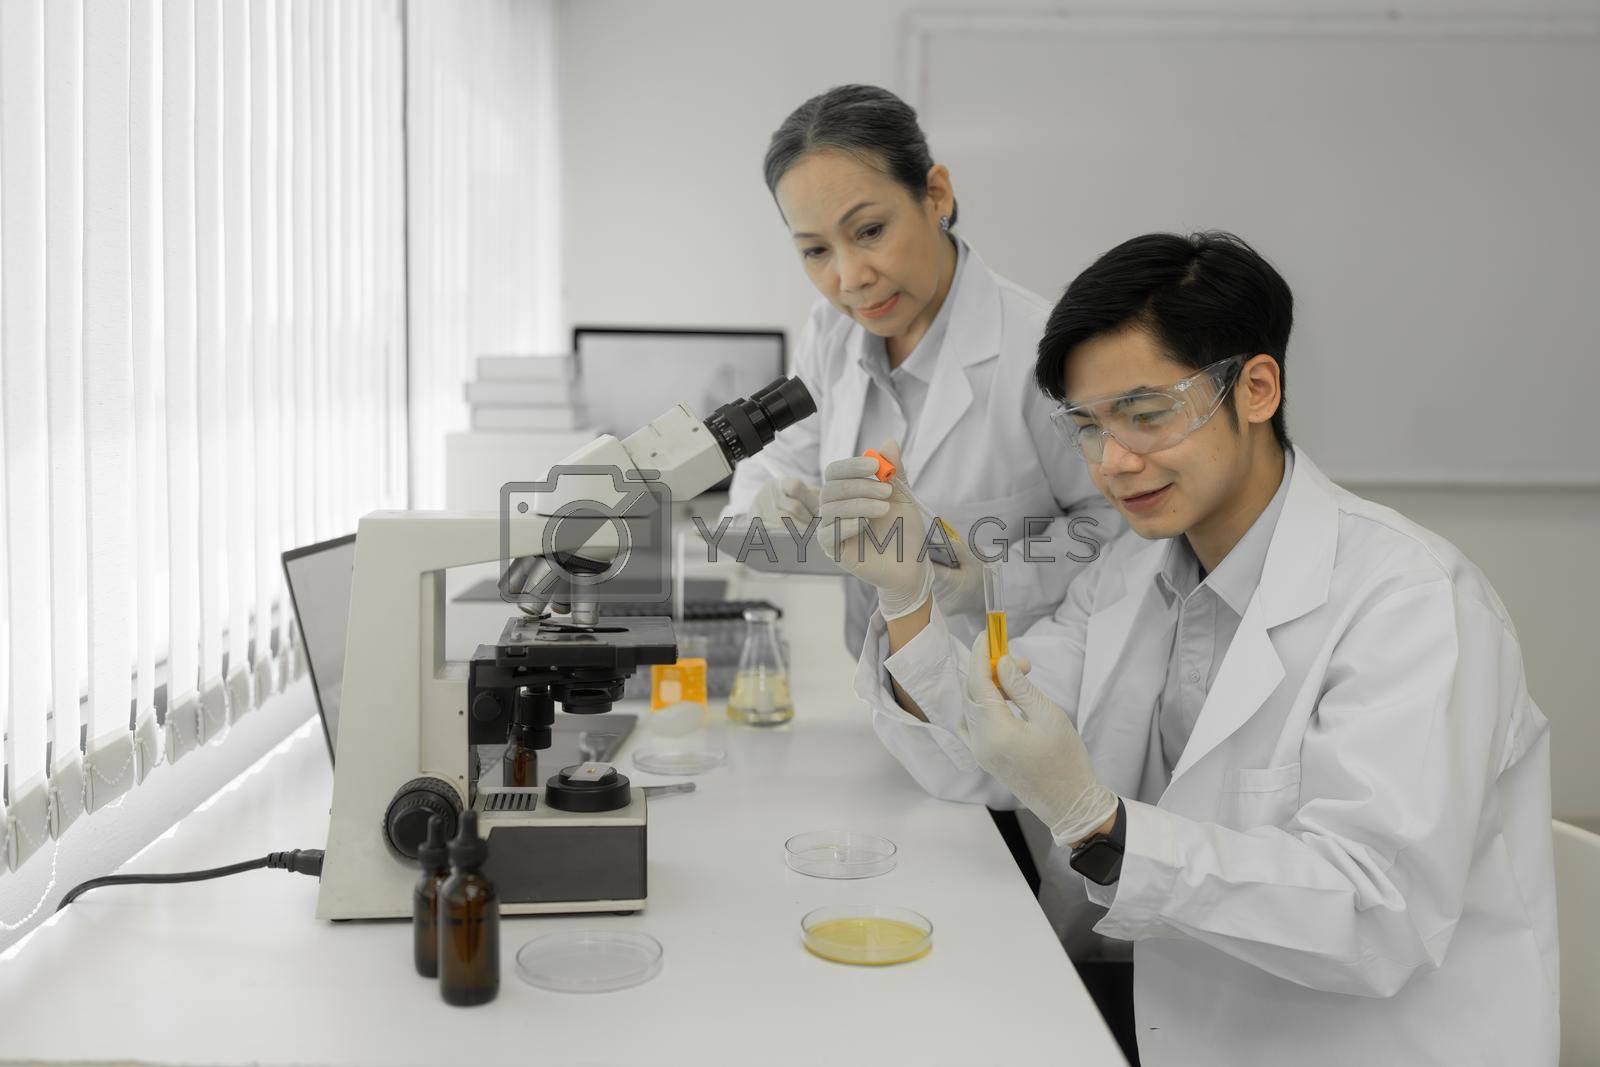 Royalty free image of Scientist holding a test tube containing cannabis extract. by itchaznong